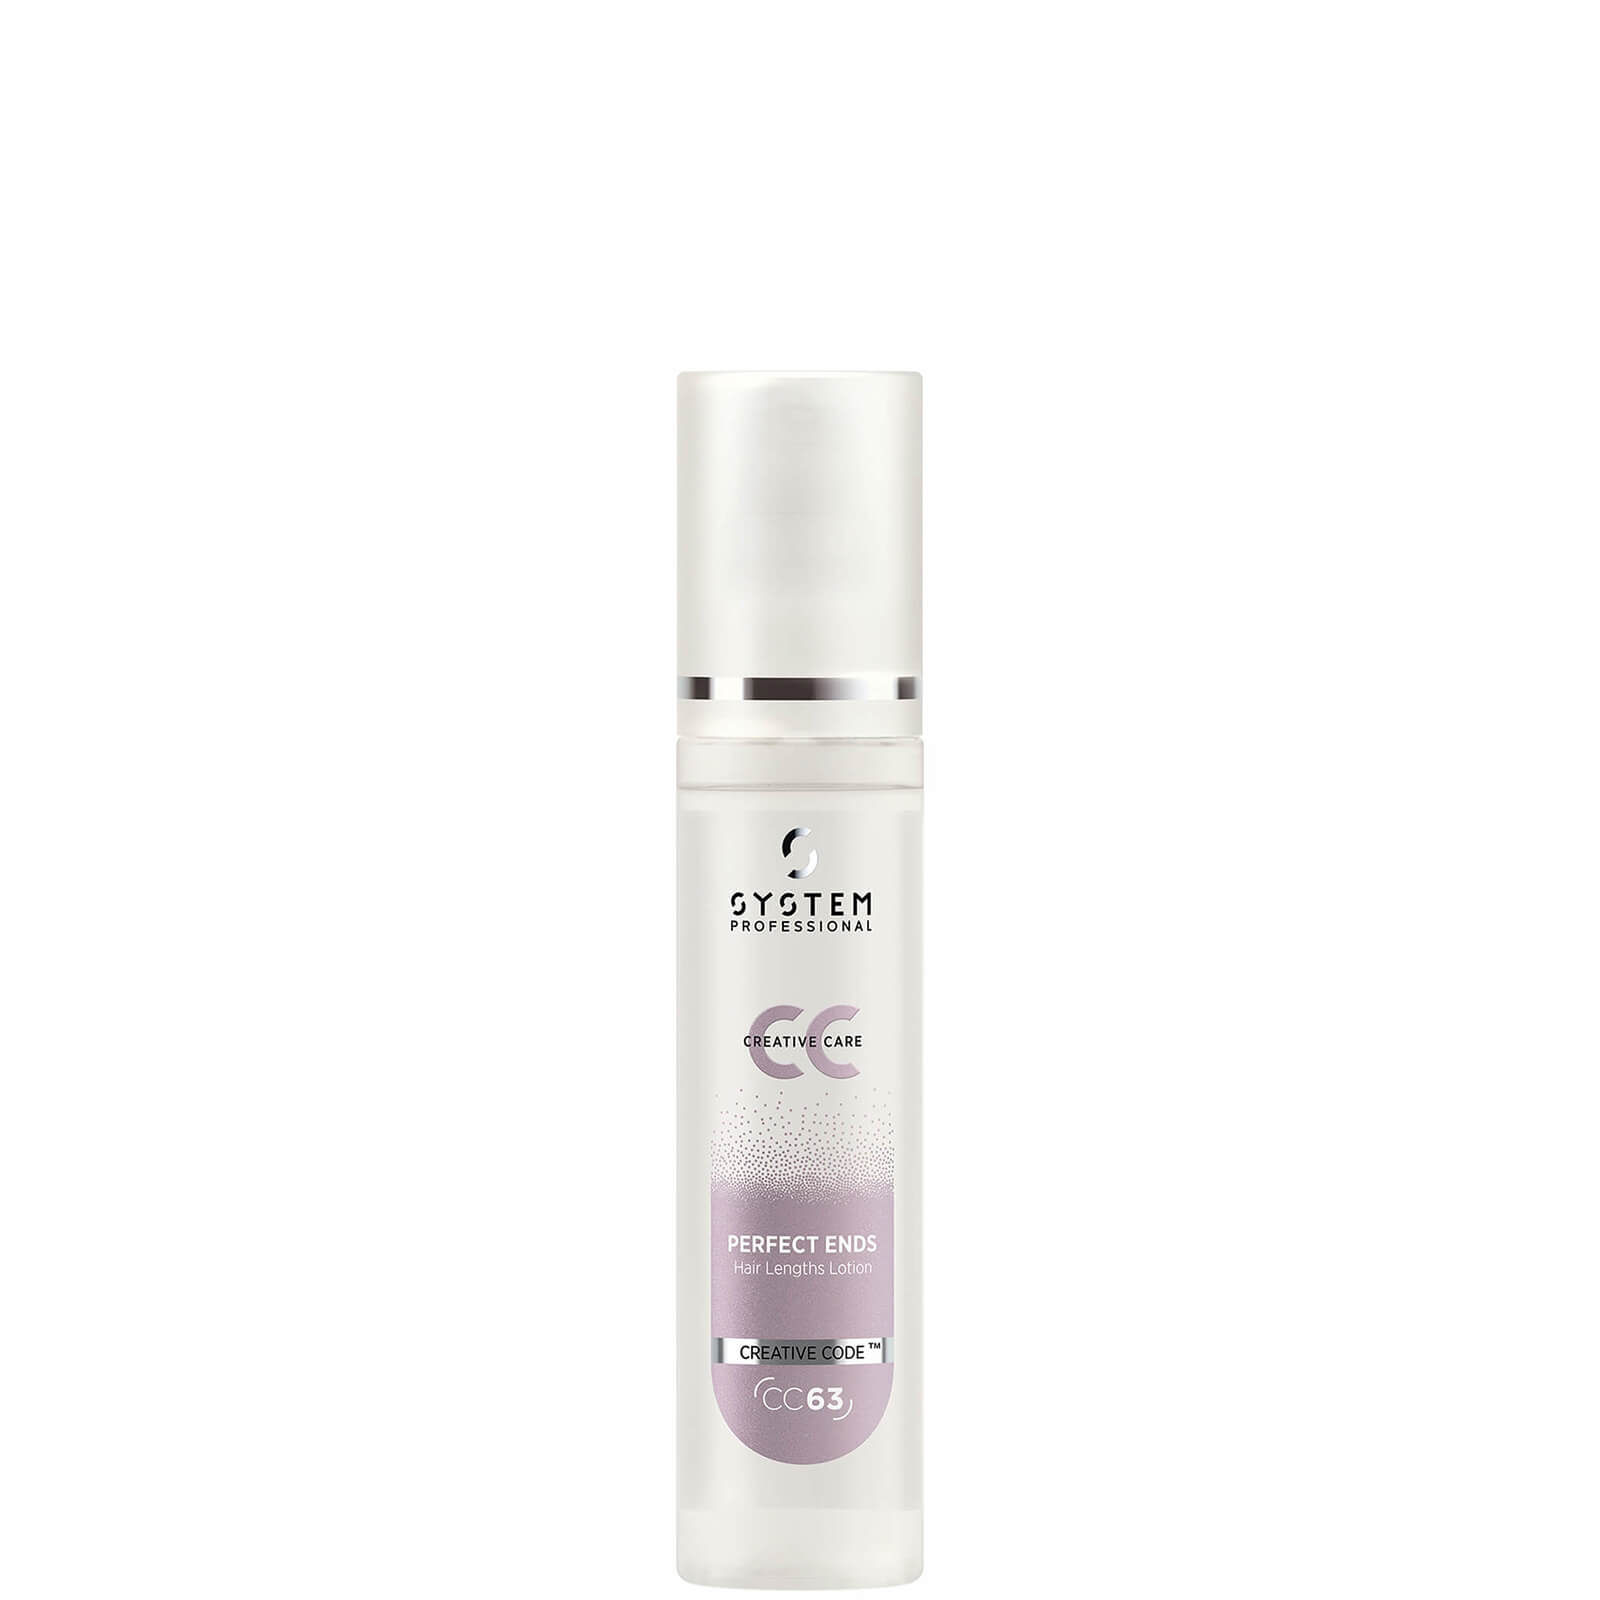 System Professional CC Perfect Ends Cream 40 ml von System Professional